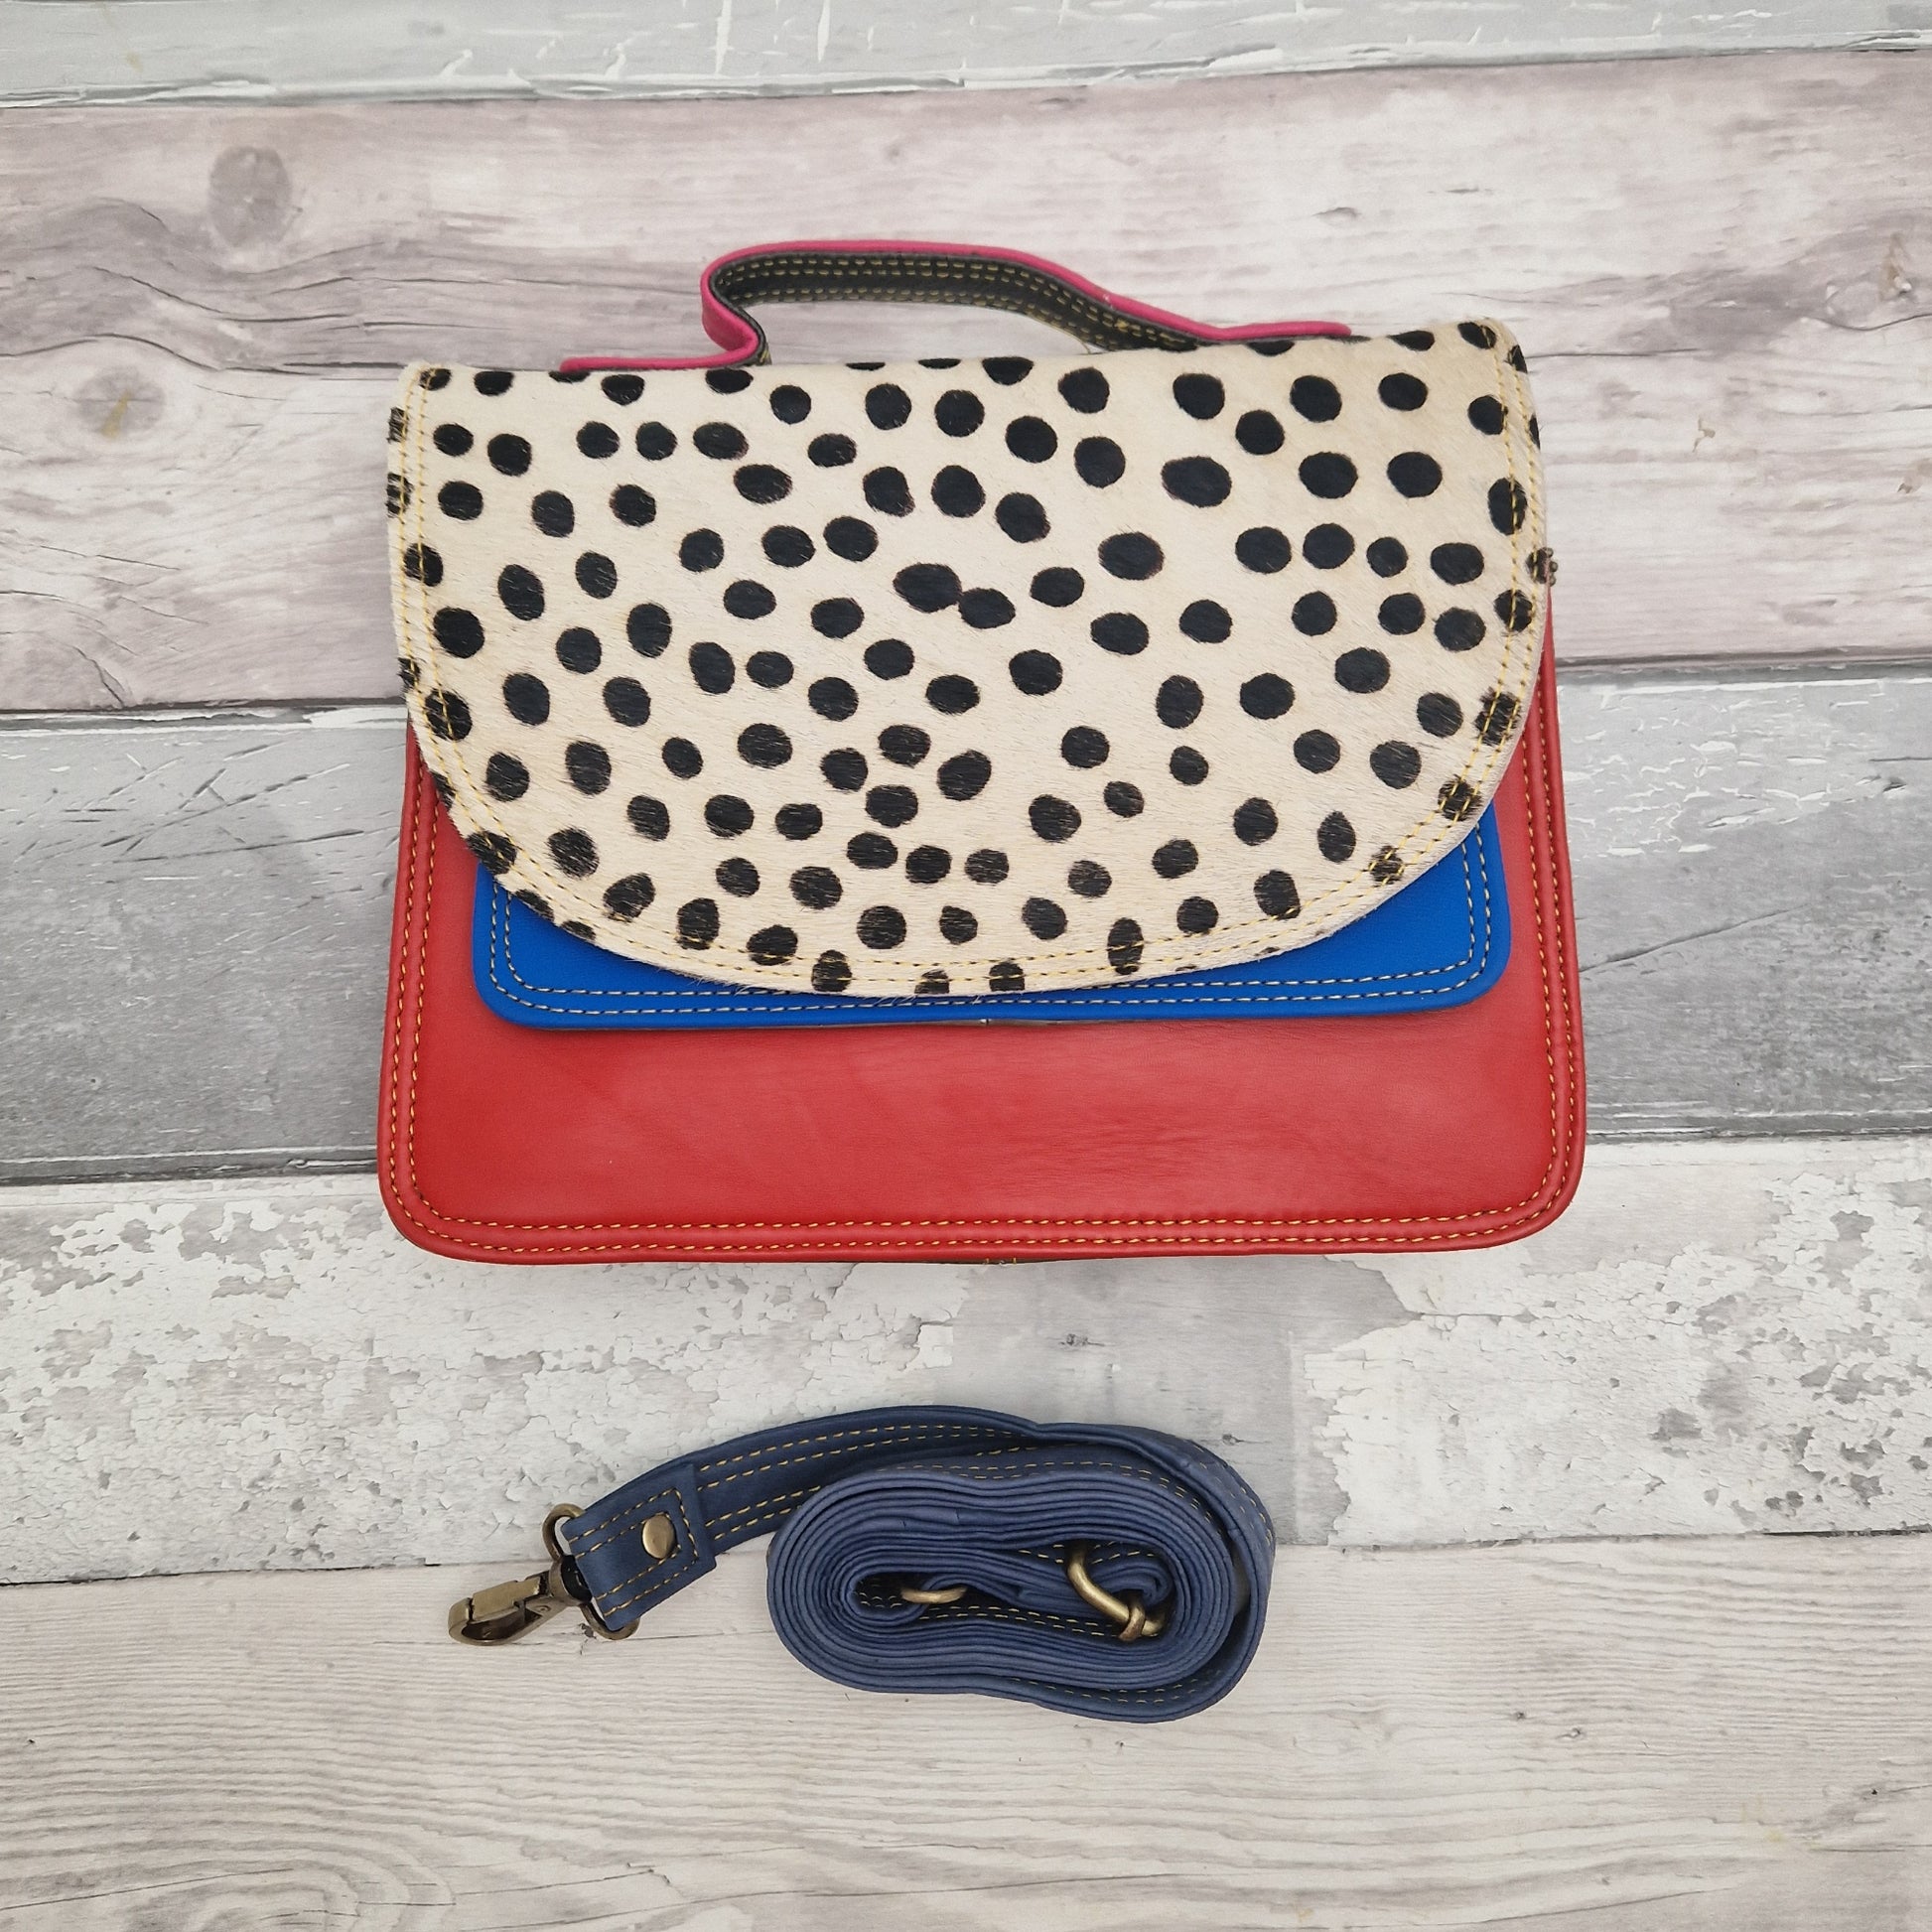 Red leather bag with a textured spot print panel.